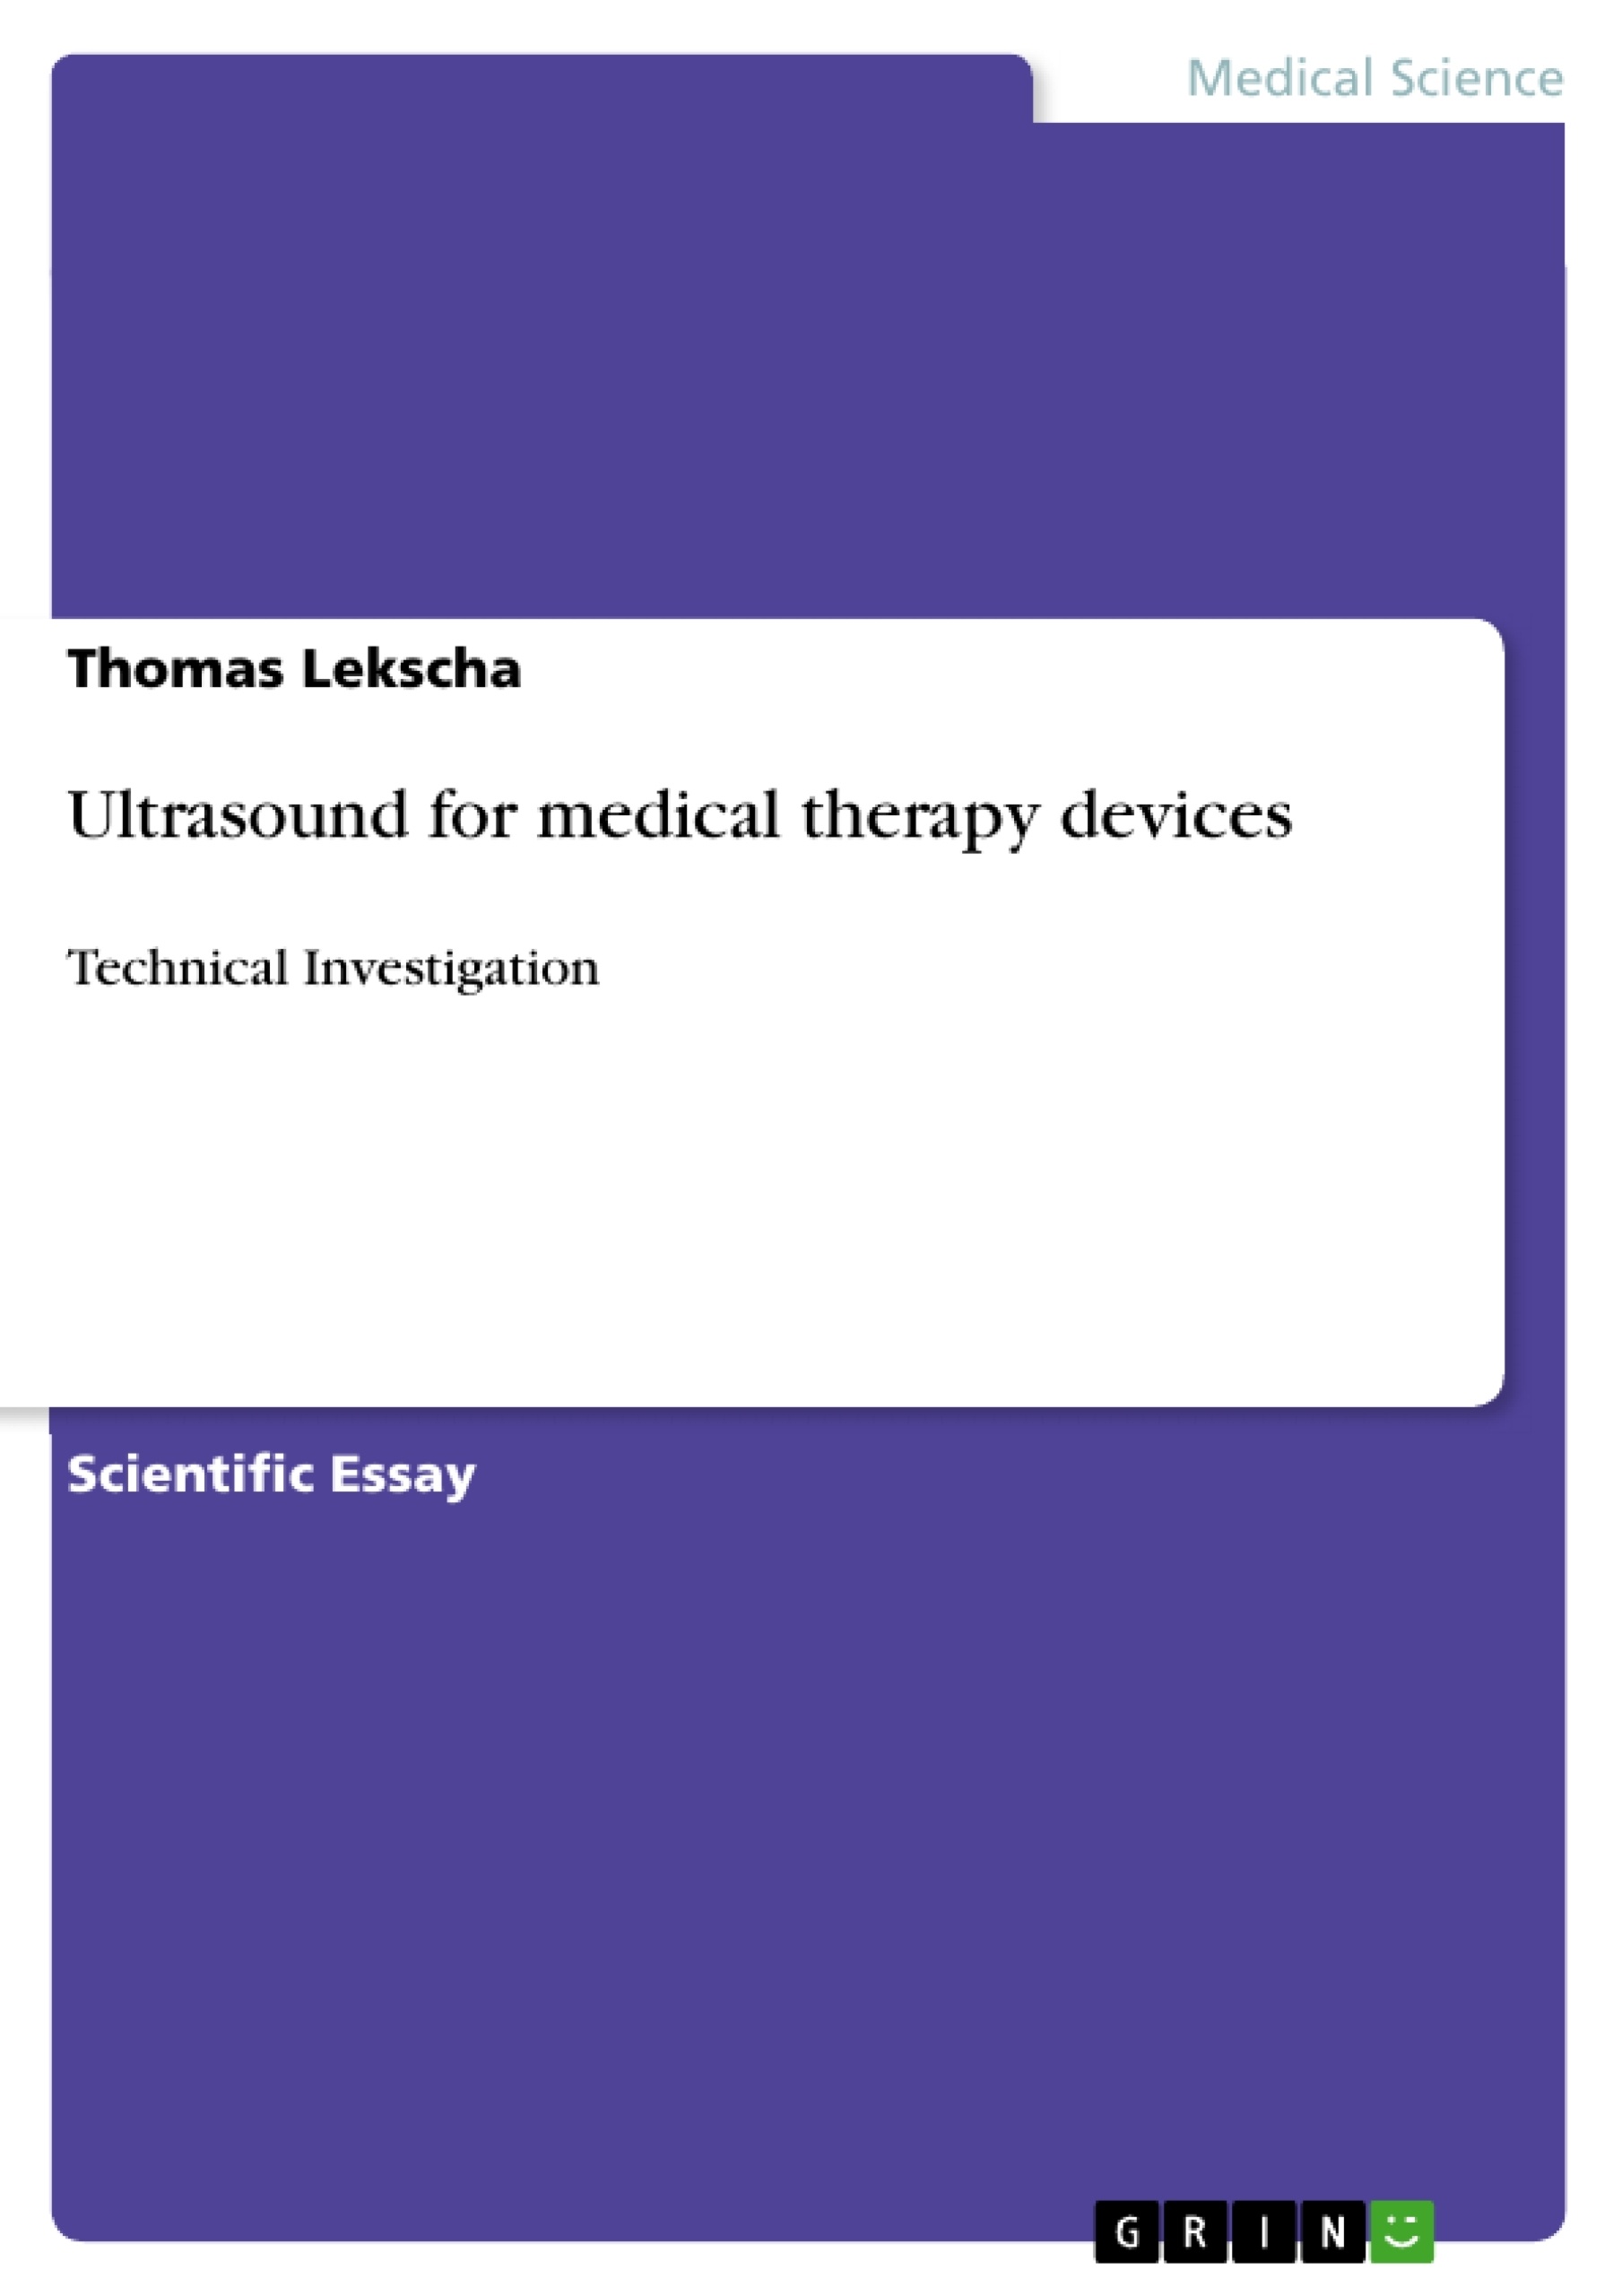 Title: Ultrasound for medical therapy devices